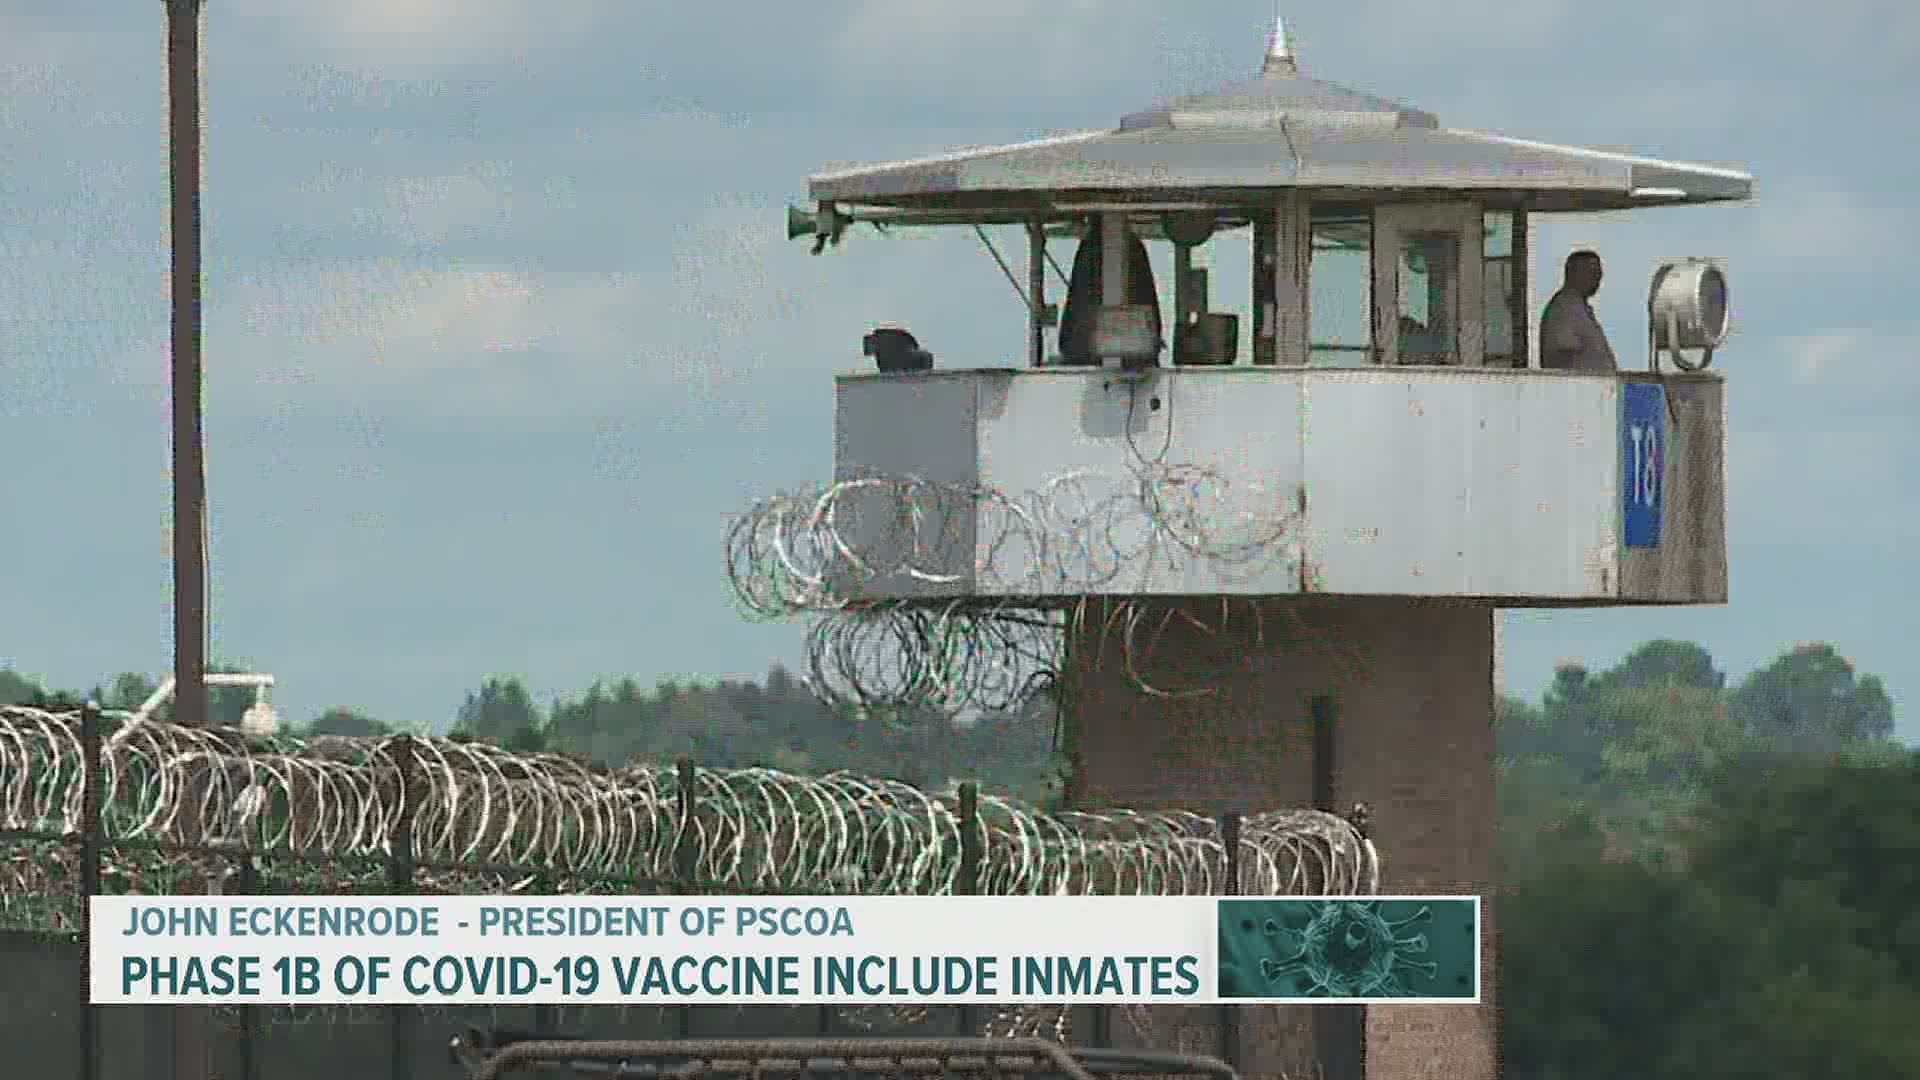 The Department of Corrections has worked with the Department of Health regarding the COVID-19 vaccine as it pertains to inmates. Inmates are now in Phase 1B.